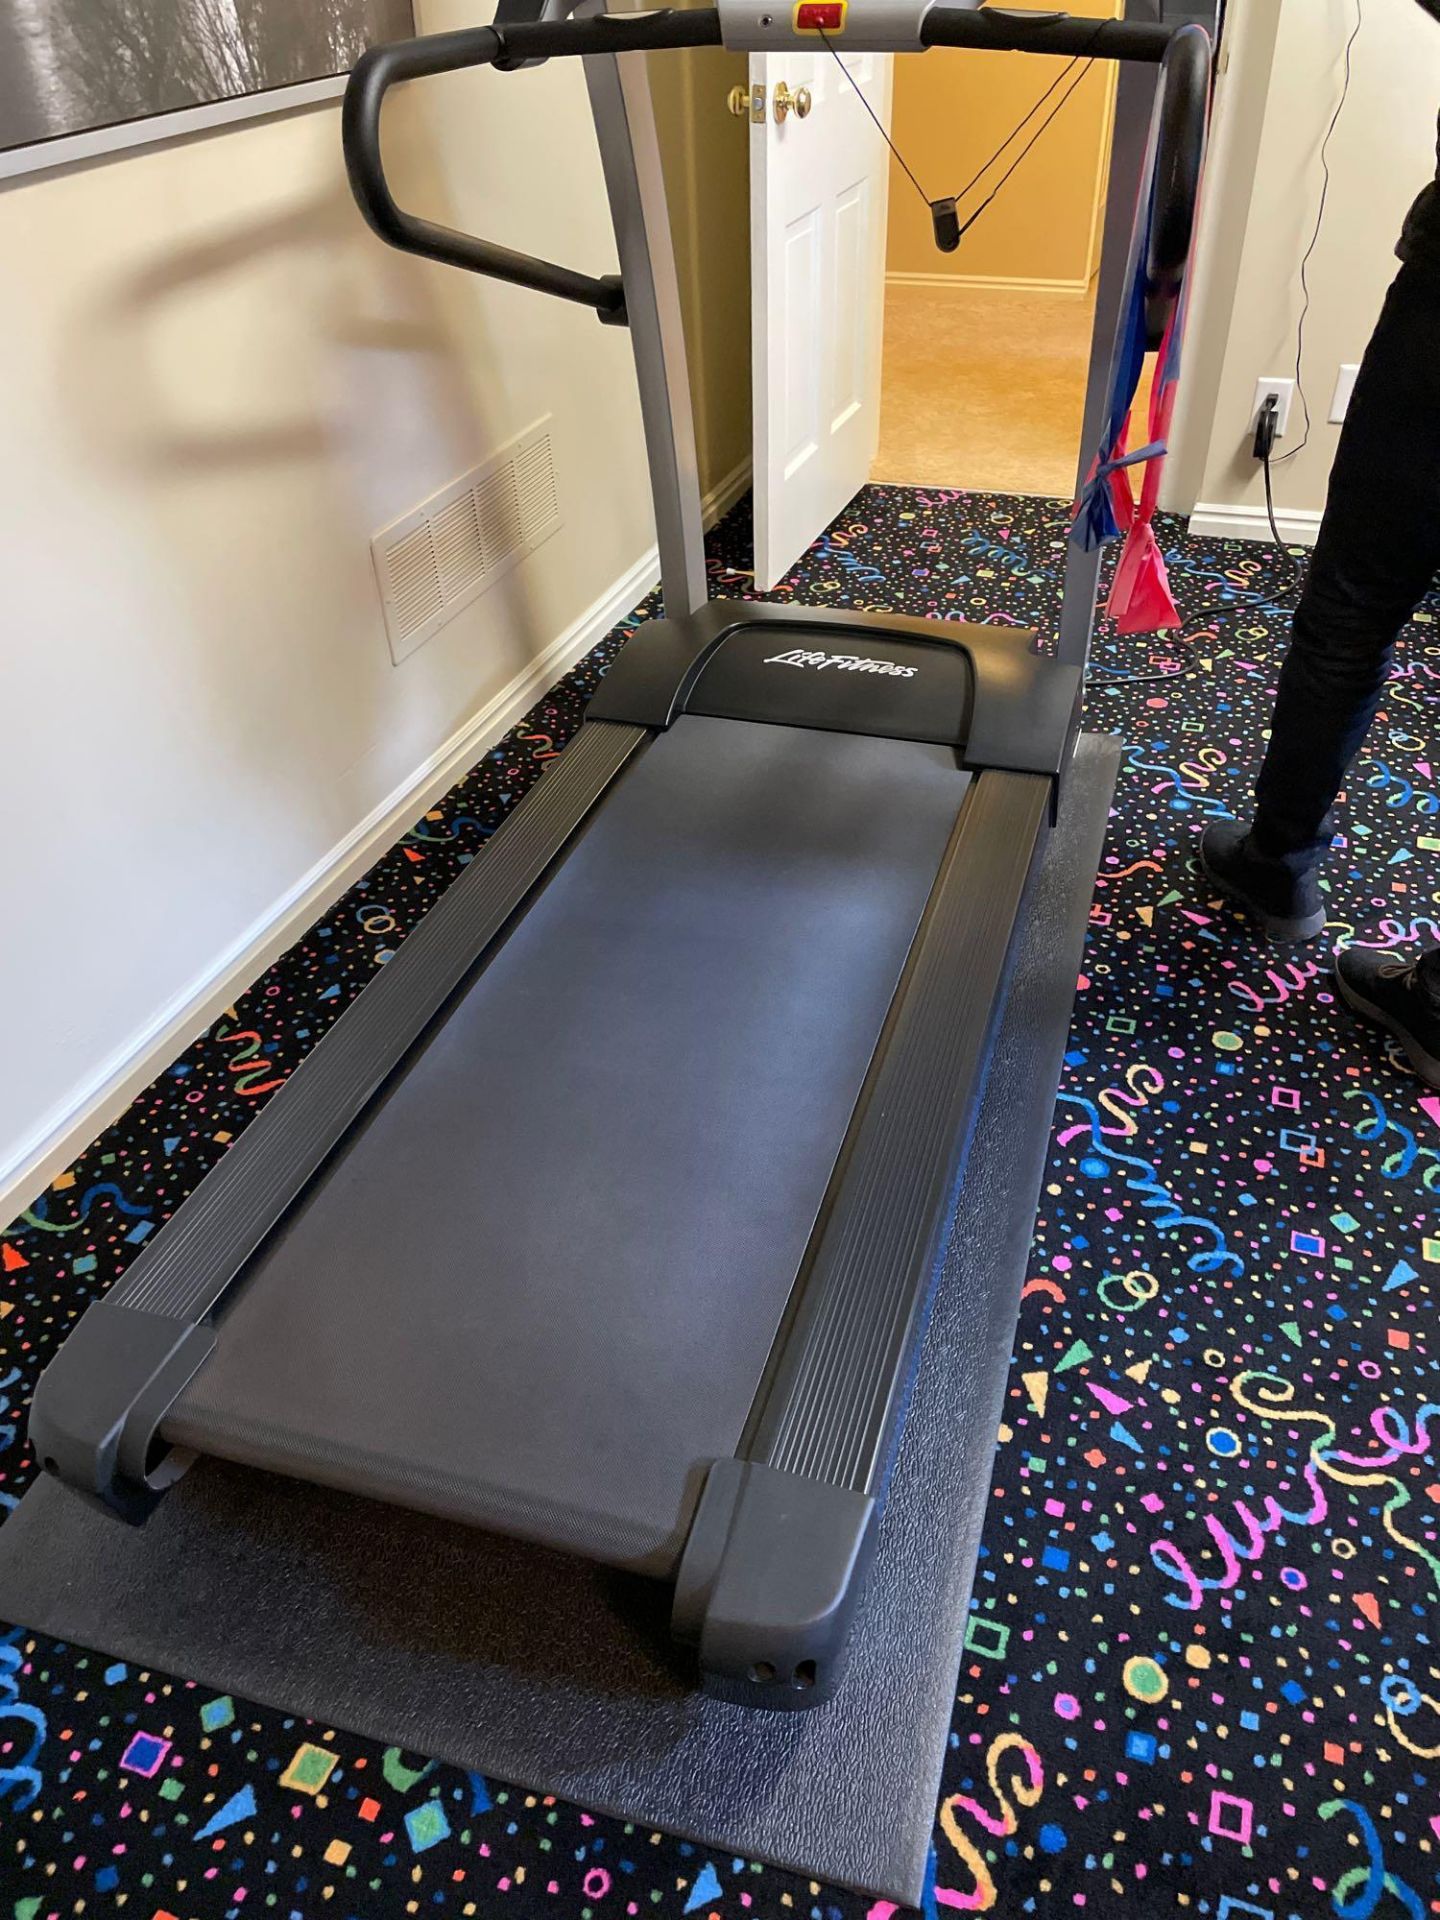 (exercise room) Life fitness treadmill flex deck - Image 3 of 4